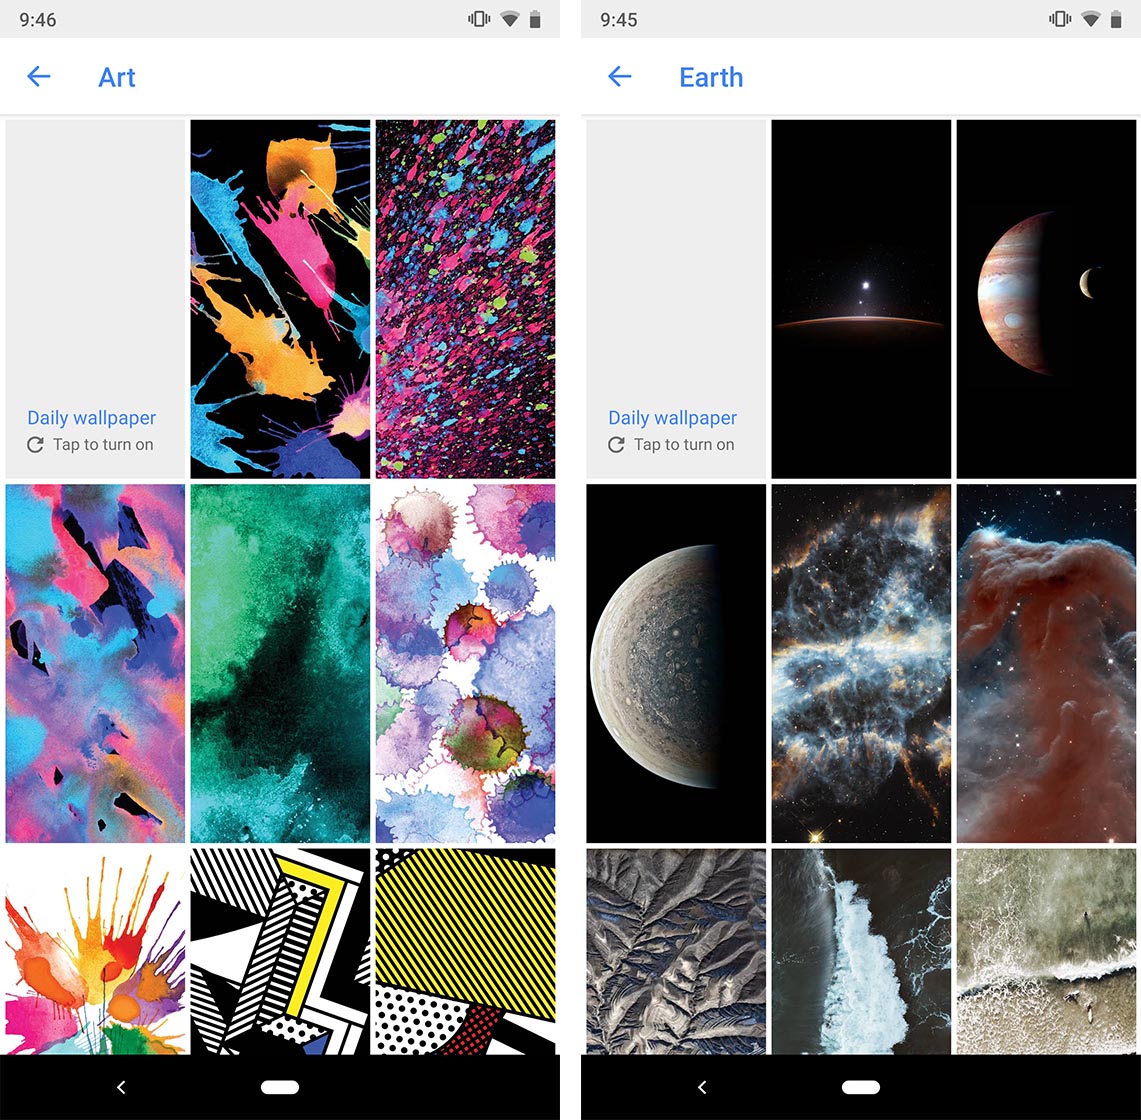 Google Wallpapers Art and Earth collections